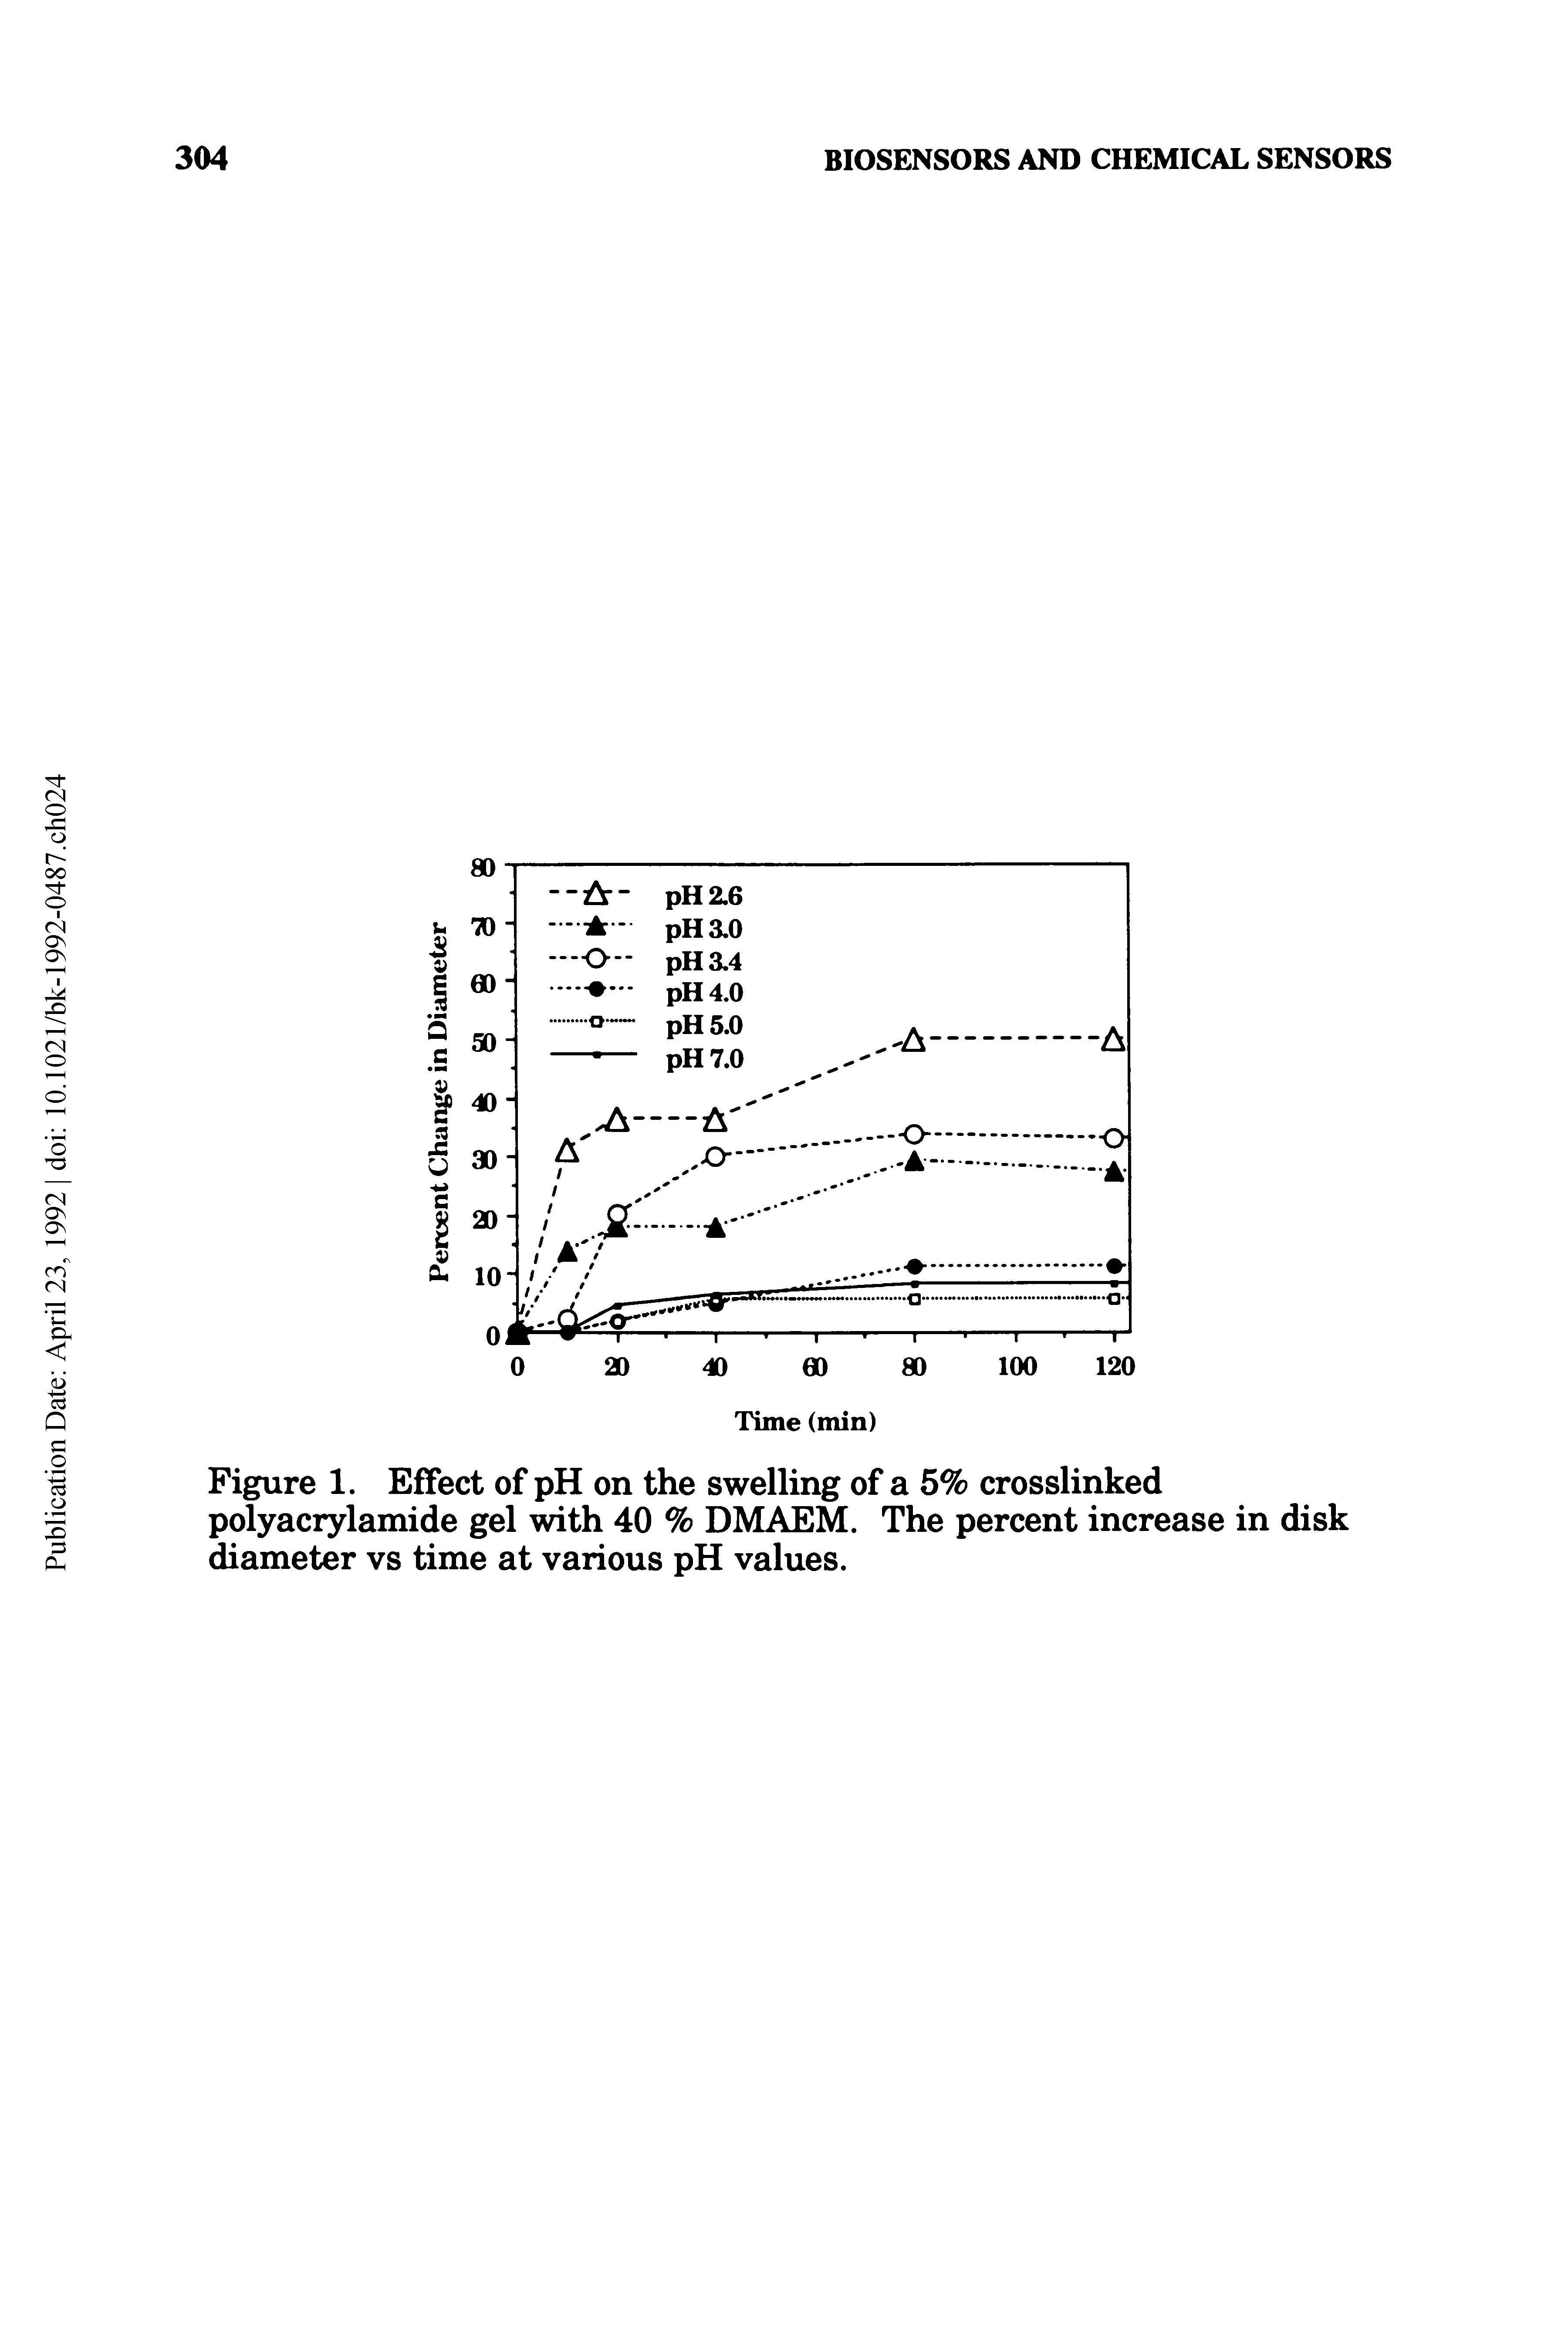 Figure 1. Effect of pH on the swelling of a 5% crosslinked polyacrylamide gel with 40 % DMAEM. The percent increase in disk diameter vs time at various pH values.